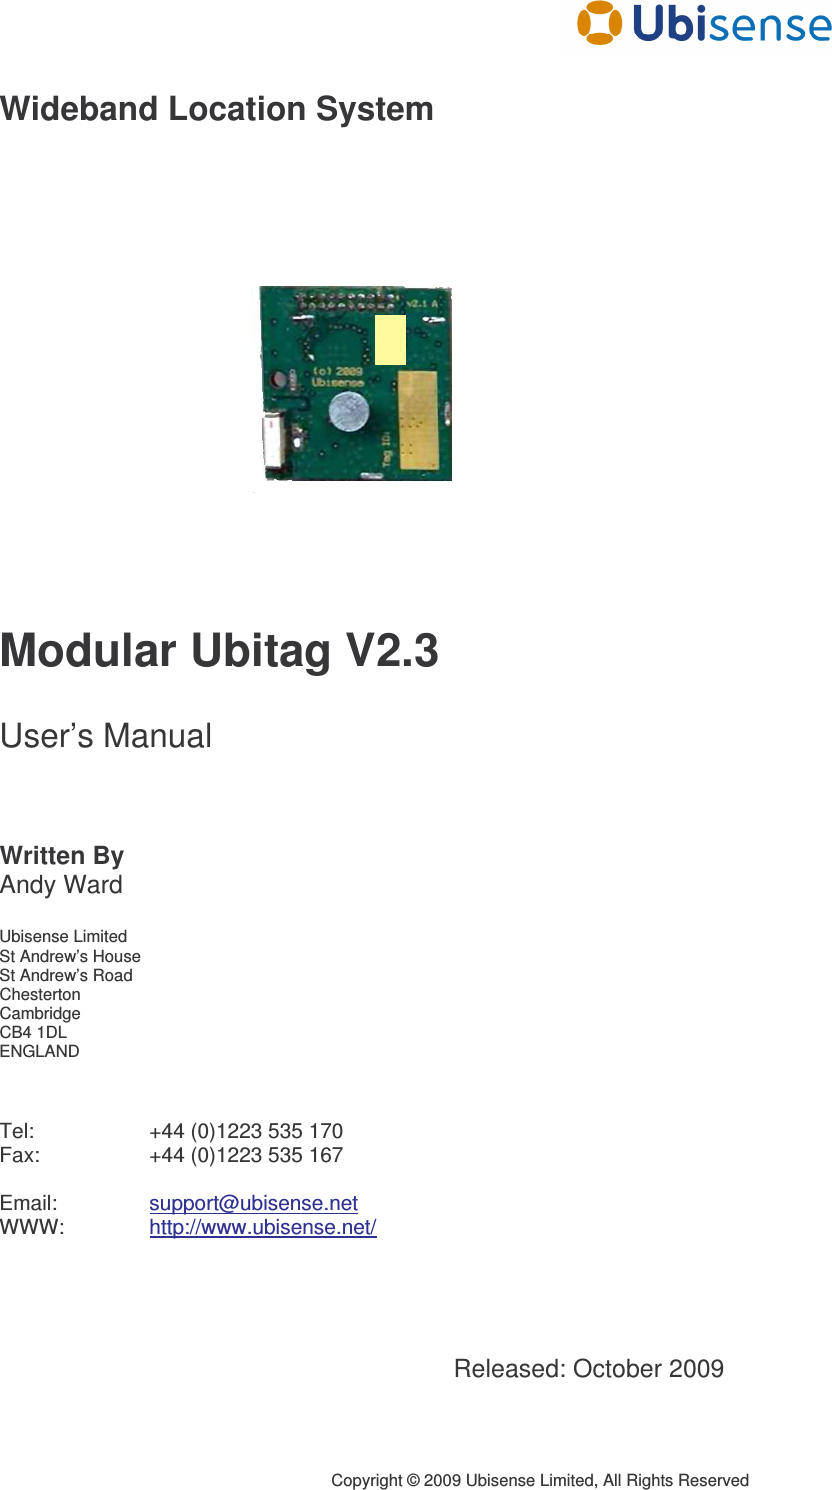      Copyright © 2009 Ubisense Limited, All Rights Reserved Wideband Location System             Modular Ubitag V2.3  User’s Manual    Written By Andy Ward  Ubisense Limited St Andrew’s House St Andrew’s Road Chesterton Cambridge CB4 1DL ENGLAND    Tel:     +44 (0)1223 535 170 Fax:     +44 (0)1223 535 167  Email:     support@ubisense.net WWW:    http://www.ubisense.net/     Released: October 2009 